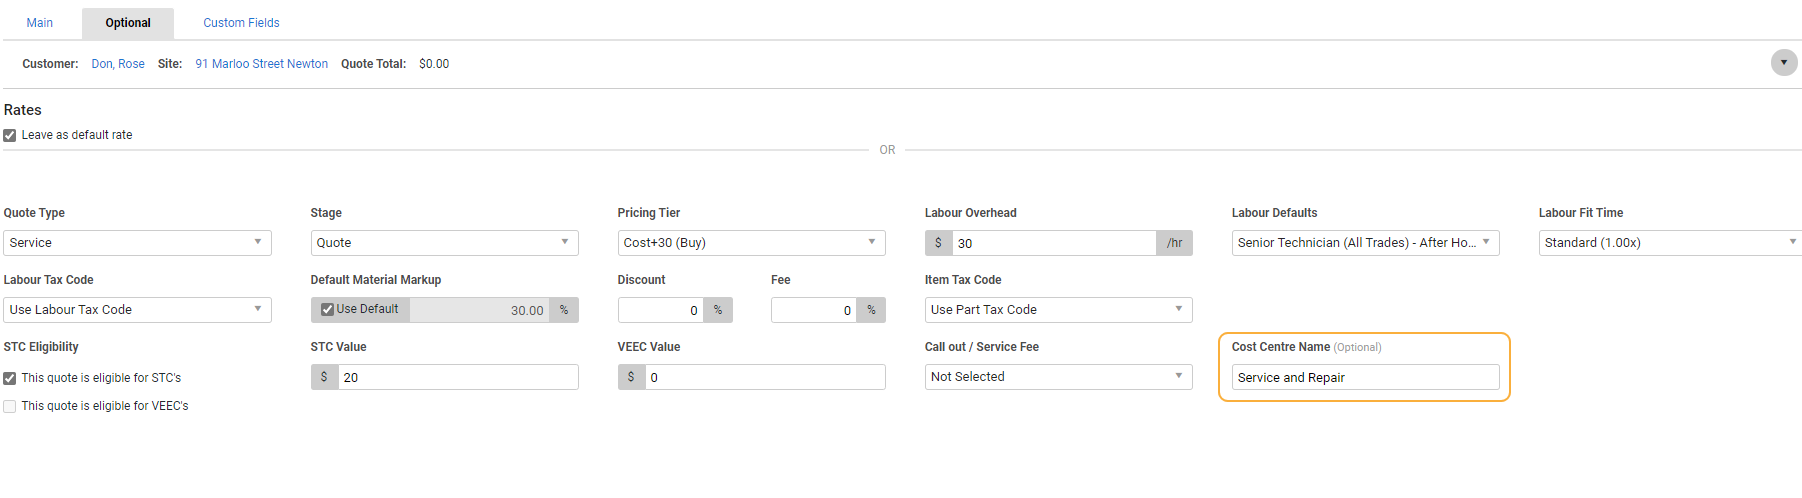 A screenshot of the job setup page with the Cost Centre Name field.